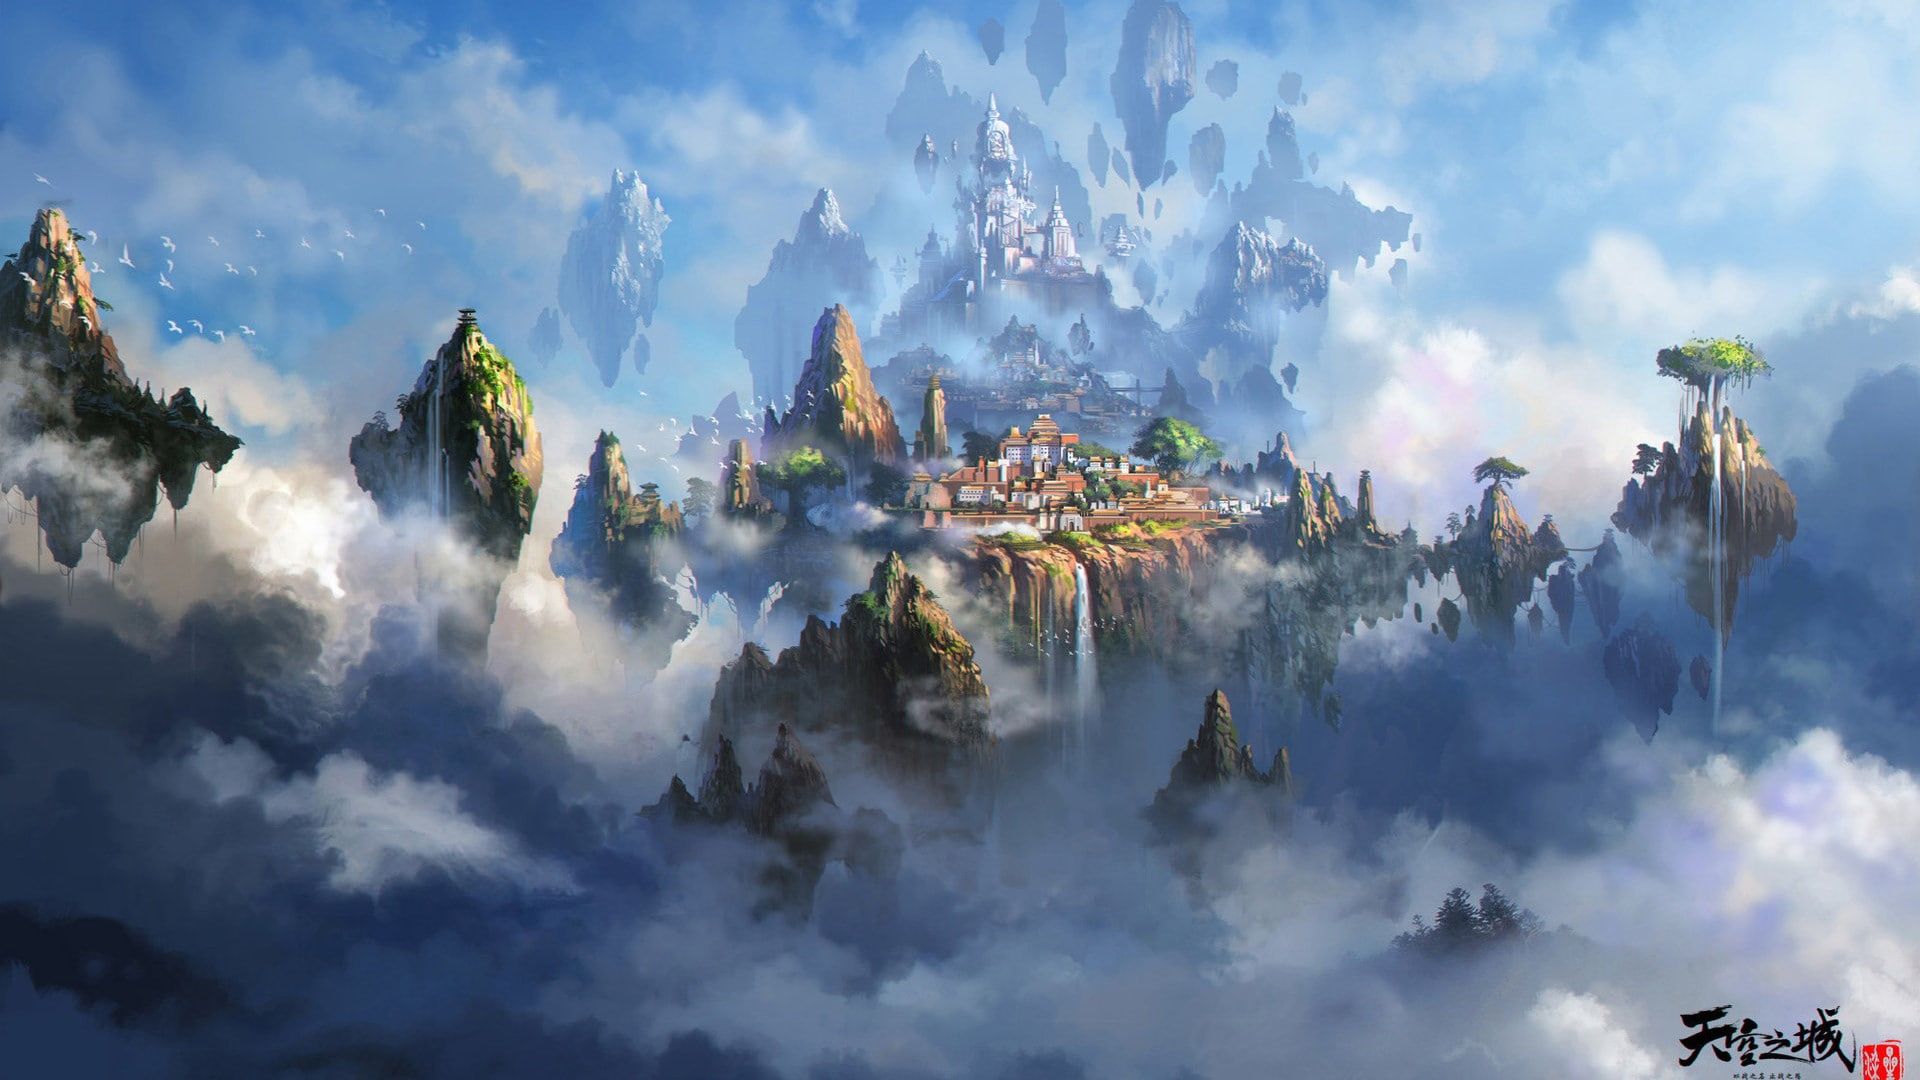 fantasy floating city and mountains 1080P wallpaper hdwallpaper